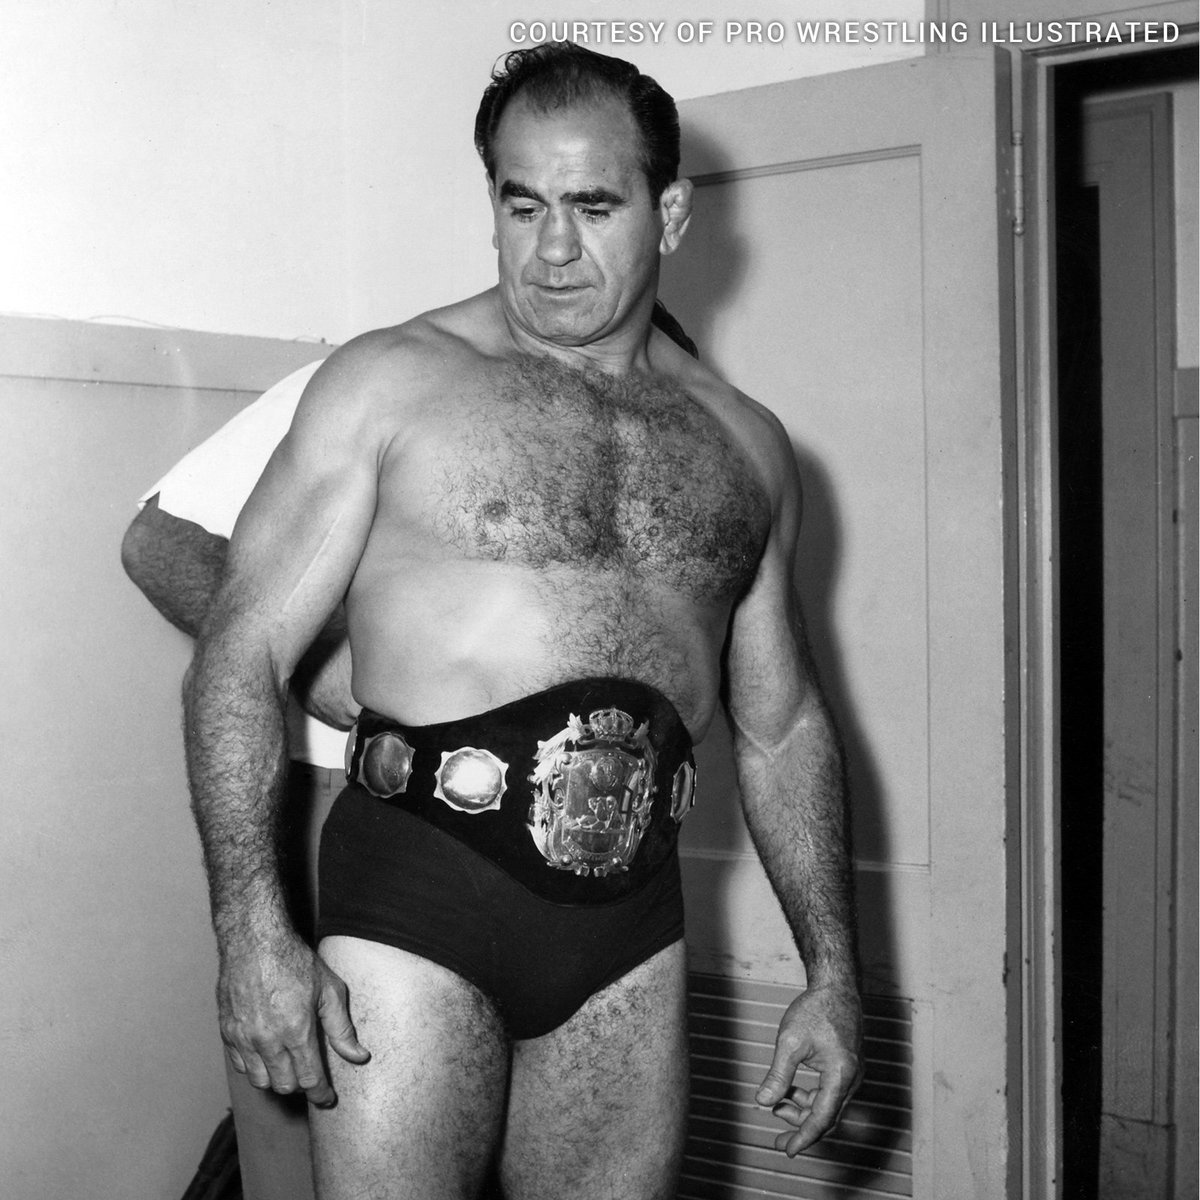 Happy Birthday to the late, great 2016 WWE Hall of Famer, and longest reigning NWA World Heavyweight Champion of all-time, Lou Thesz. #WWEHOF 

📸 PWI